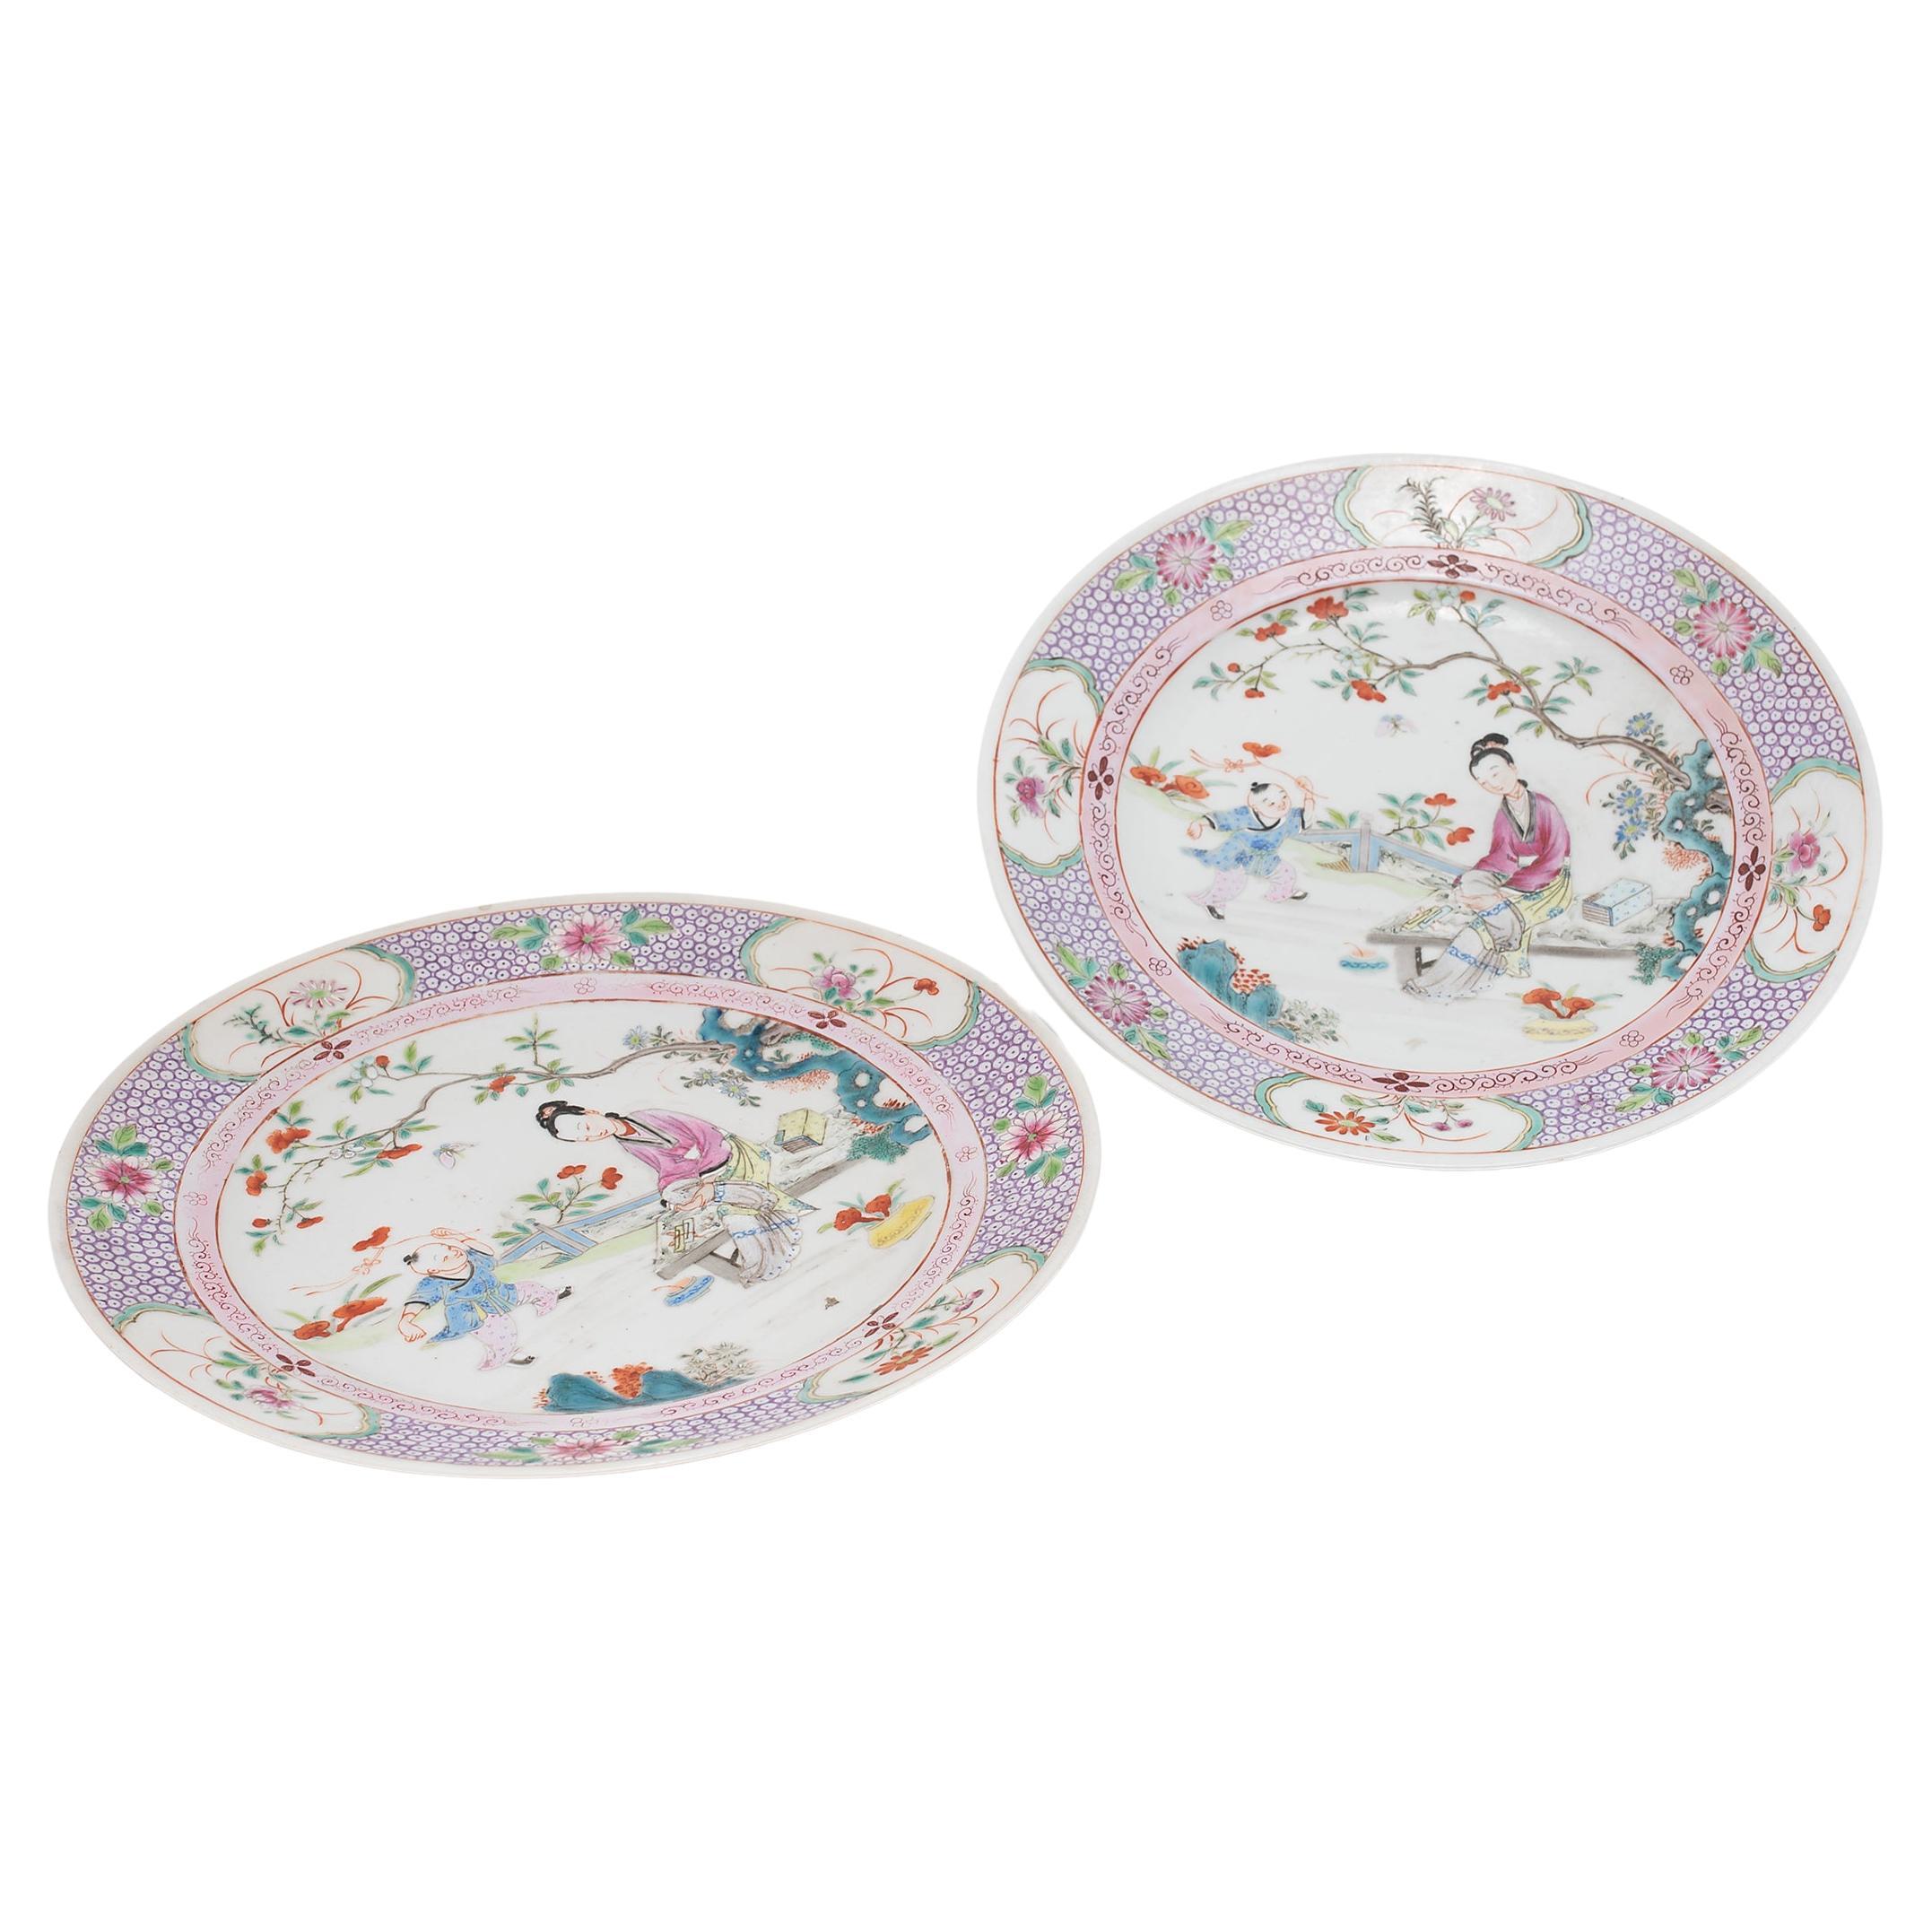 Pair of Chinese Famille Rose Plates with Garden Scenes, C. 1900